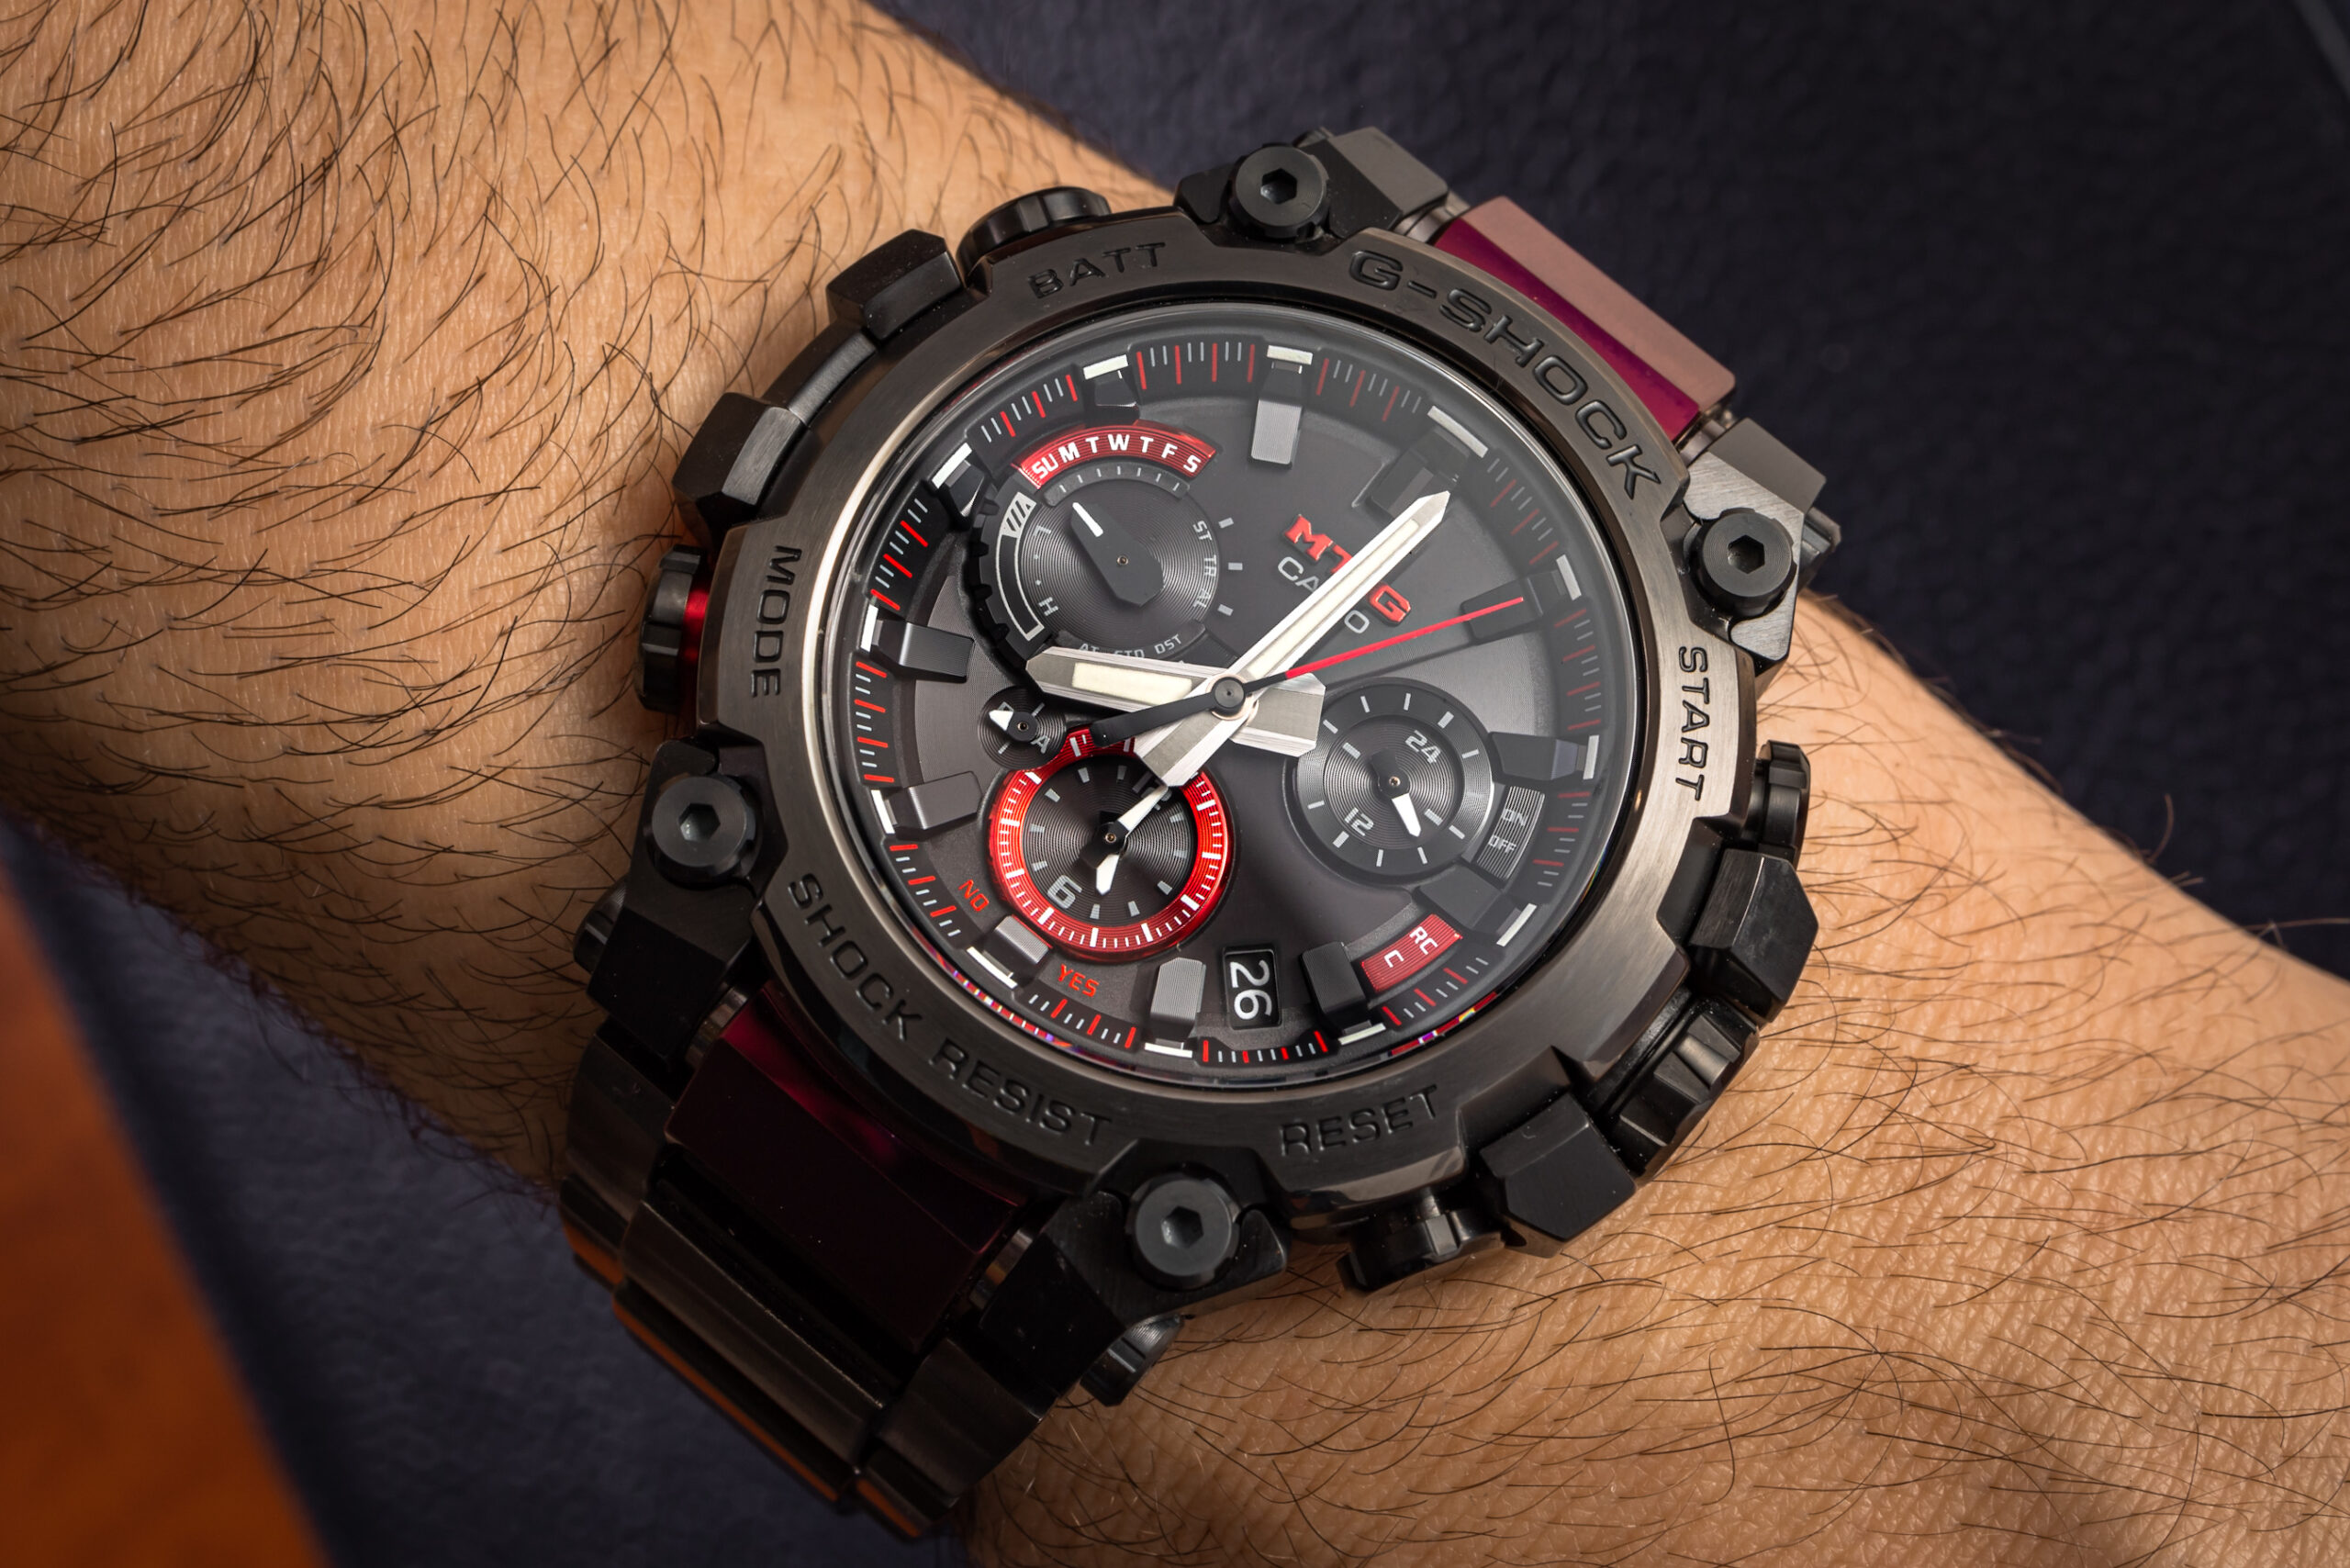 G-SHOCK's MTGB3000 Watch Is The Brand's Thinnest to Date